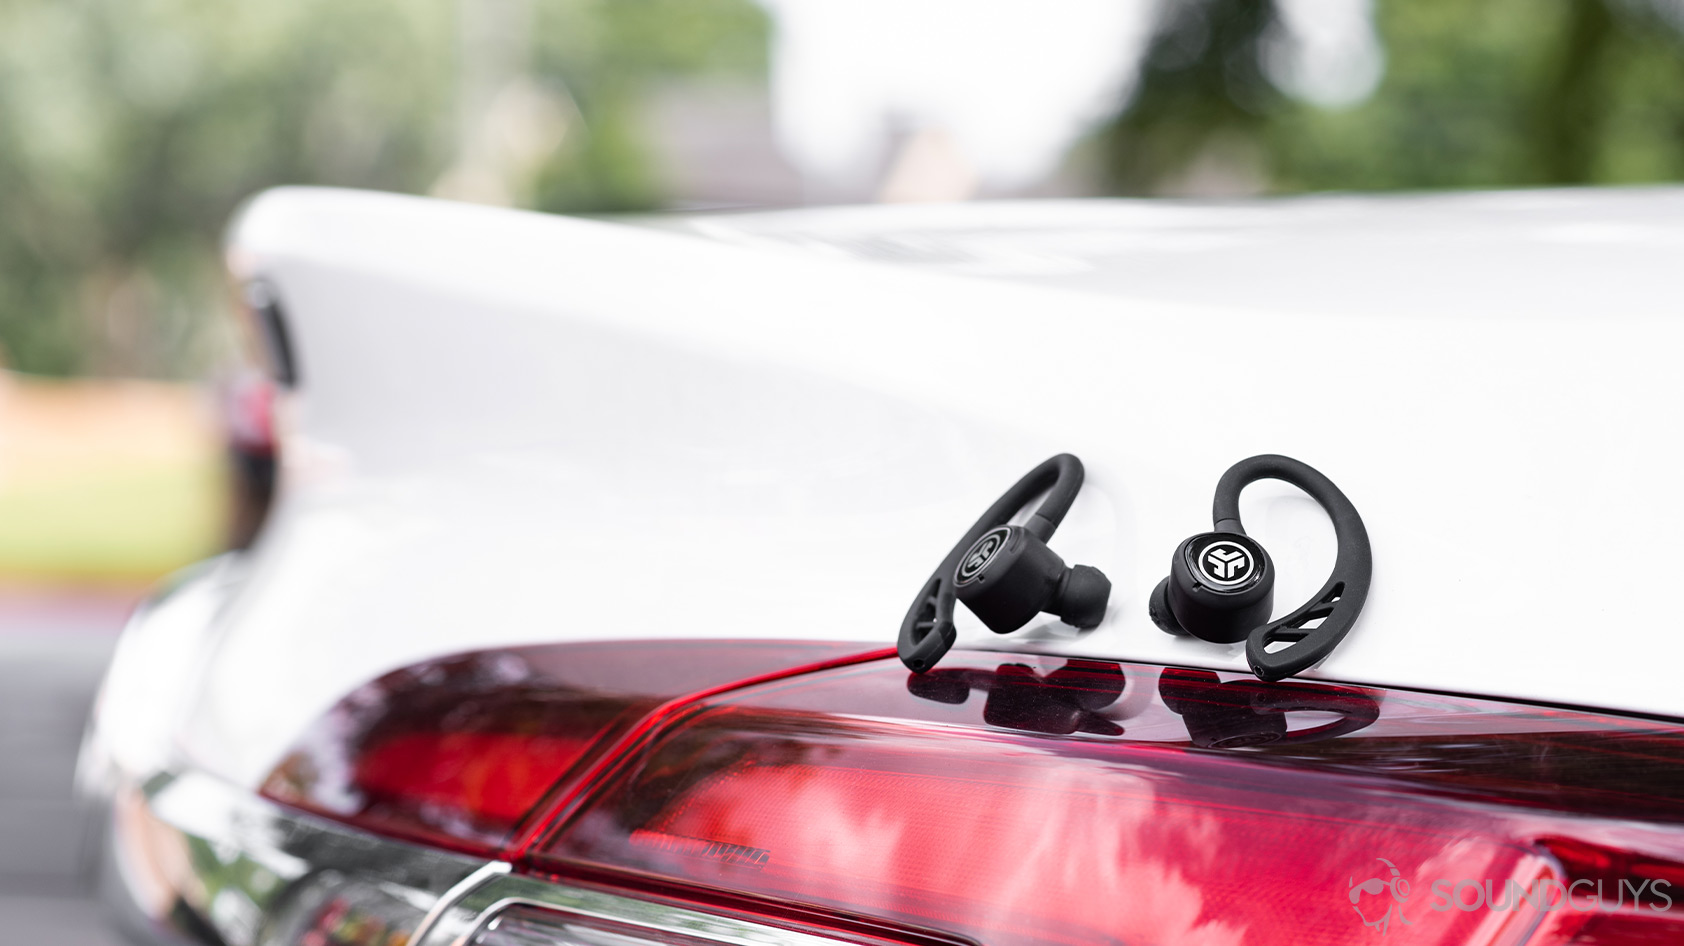 The JLab Epic Air Sport earbuds on a Buick car tail light.